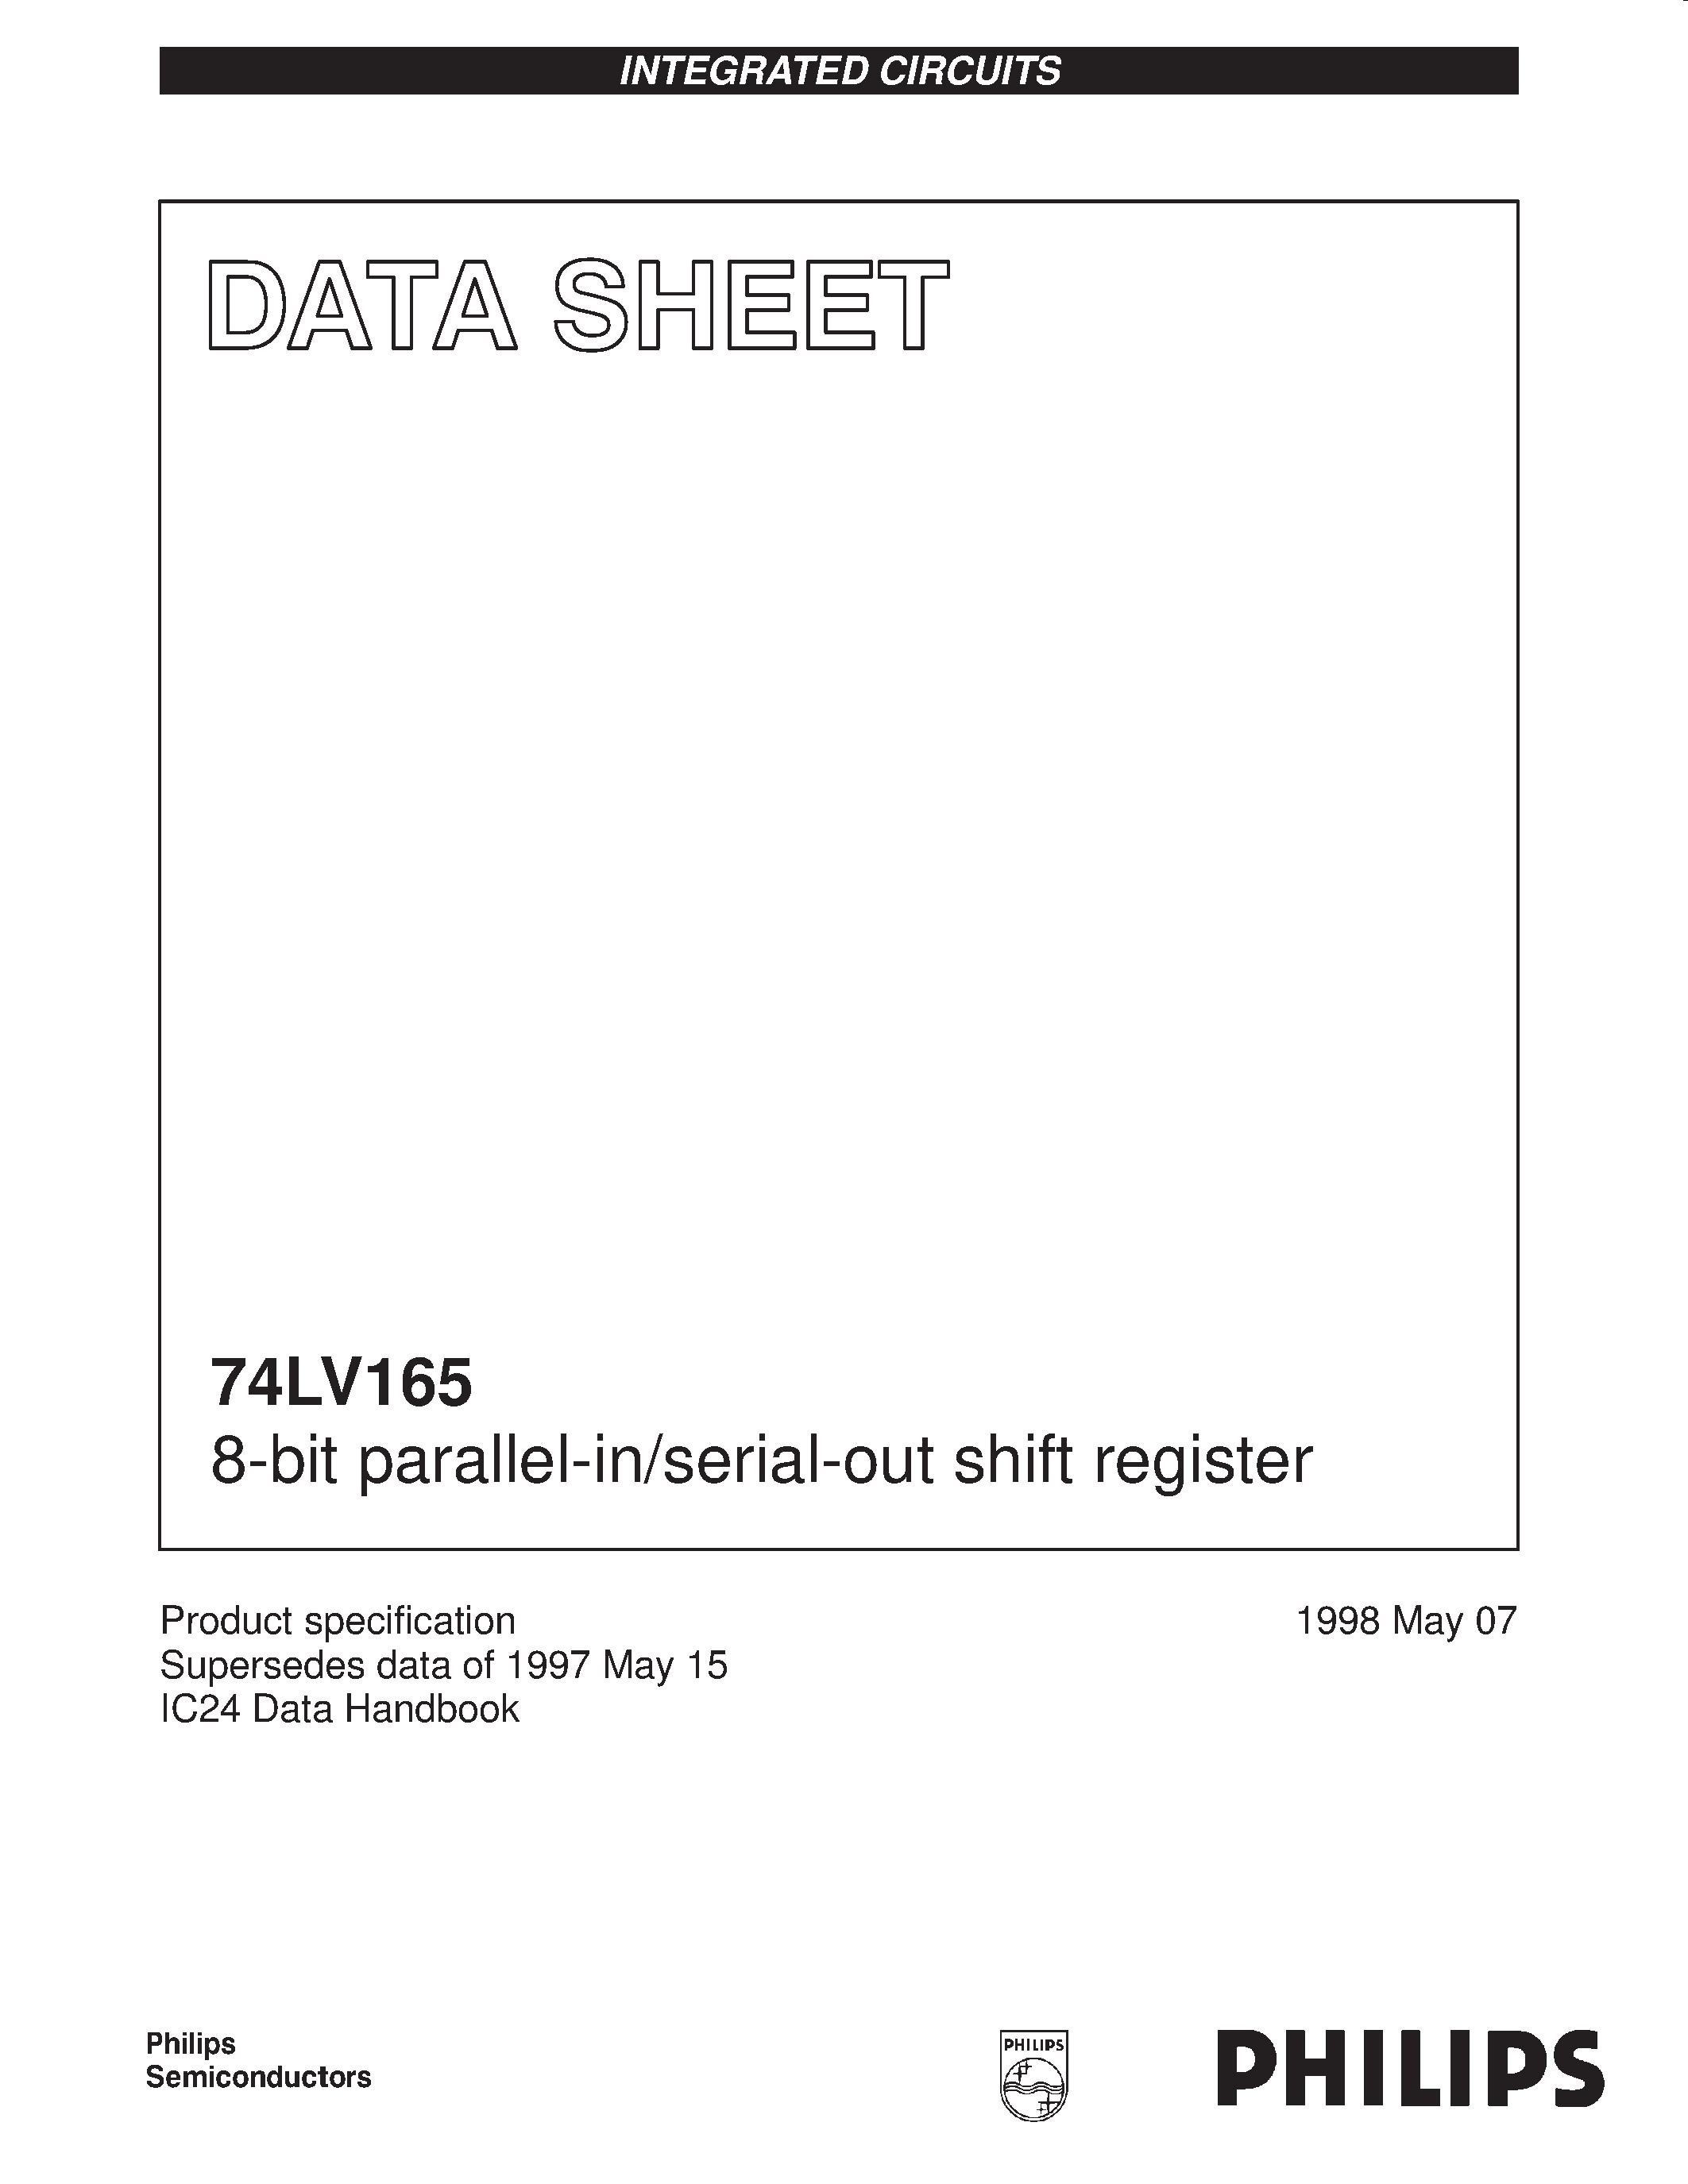 Datasheet 74LV165 - 8-bit parallel-in/serial-out shift register page 1